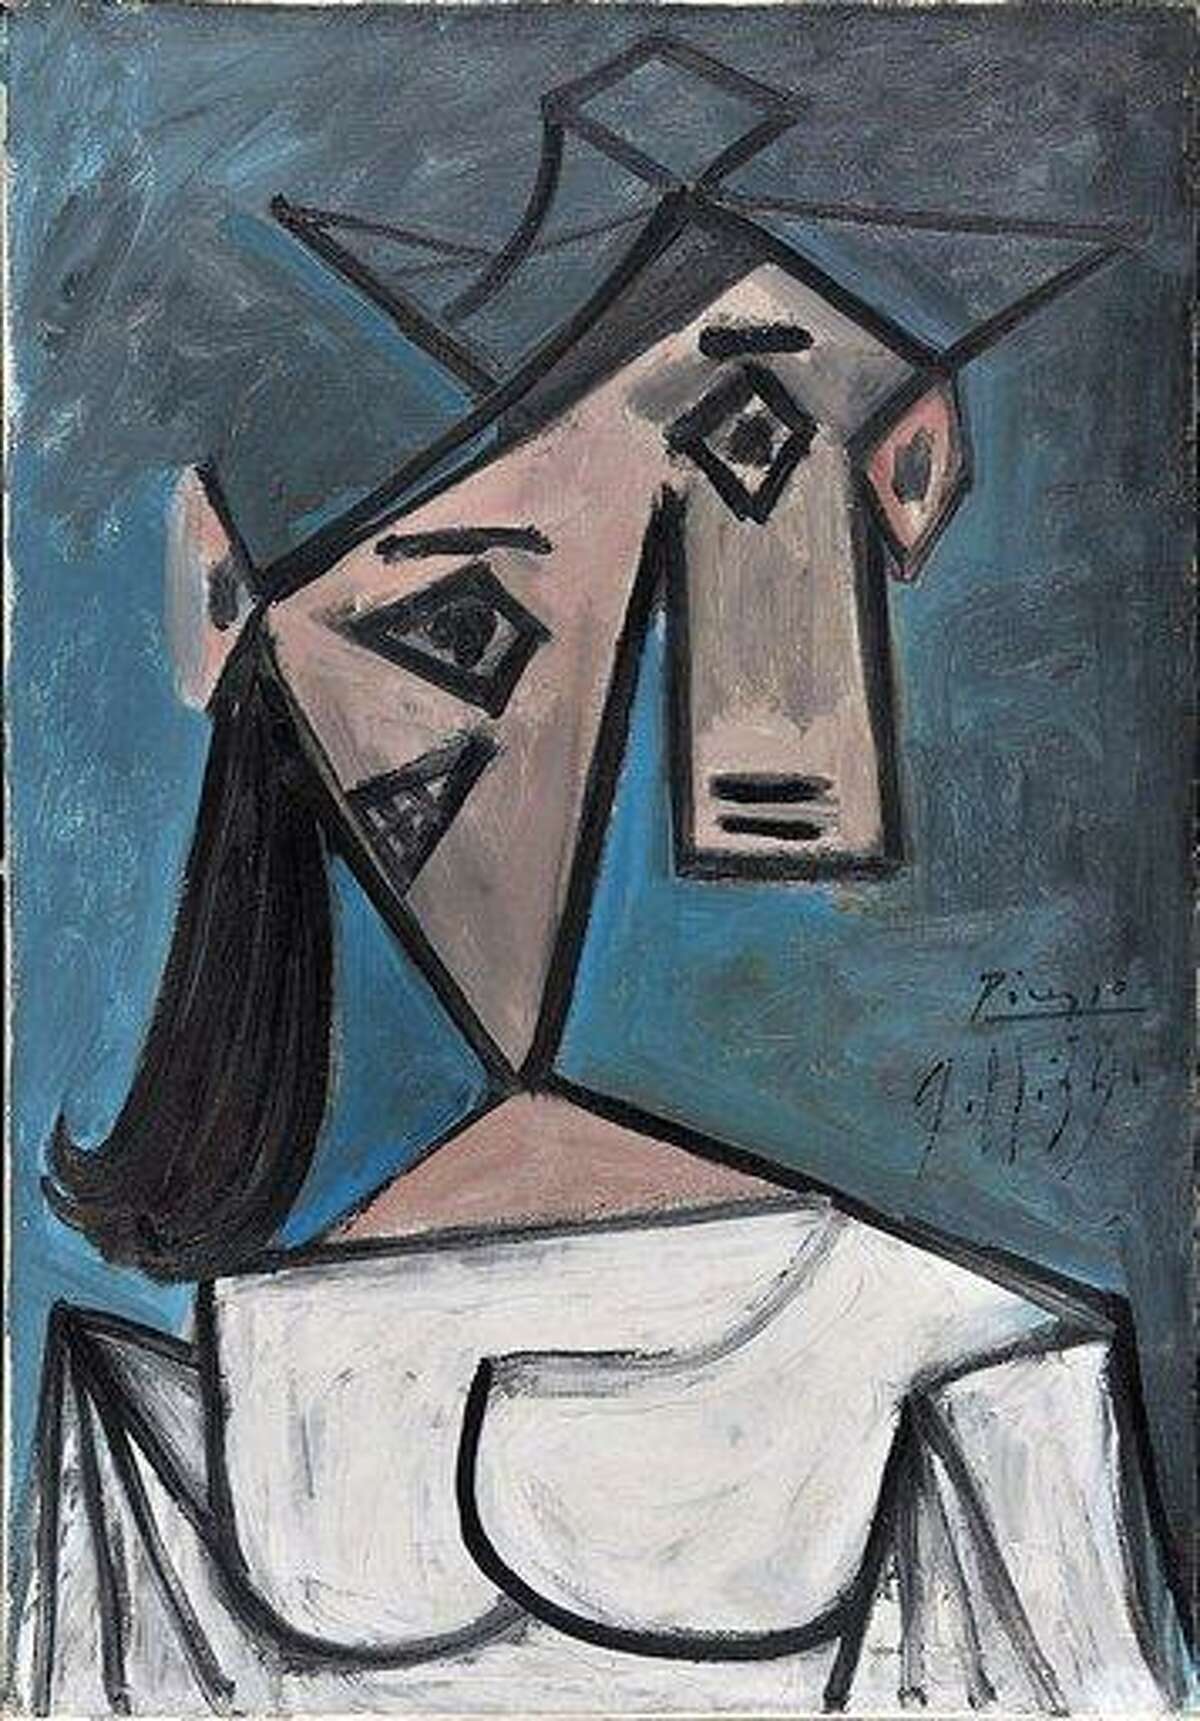 A 1939 female bust by Spanish painter Pablo Picasso, belonging to the National Art Gallery in Athens, is one of three works stolen from the Athens museum early Monday Greek police said. The unknown thieves also made off with a work by Dutch painter Piet Mondrian. Associated Press